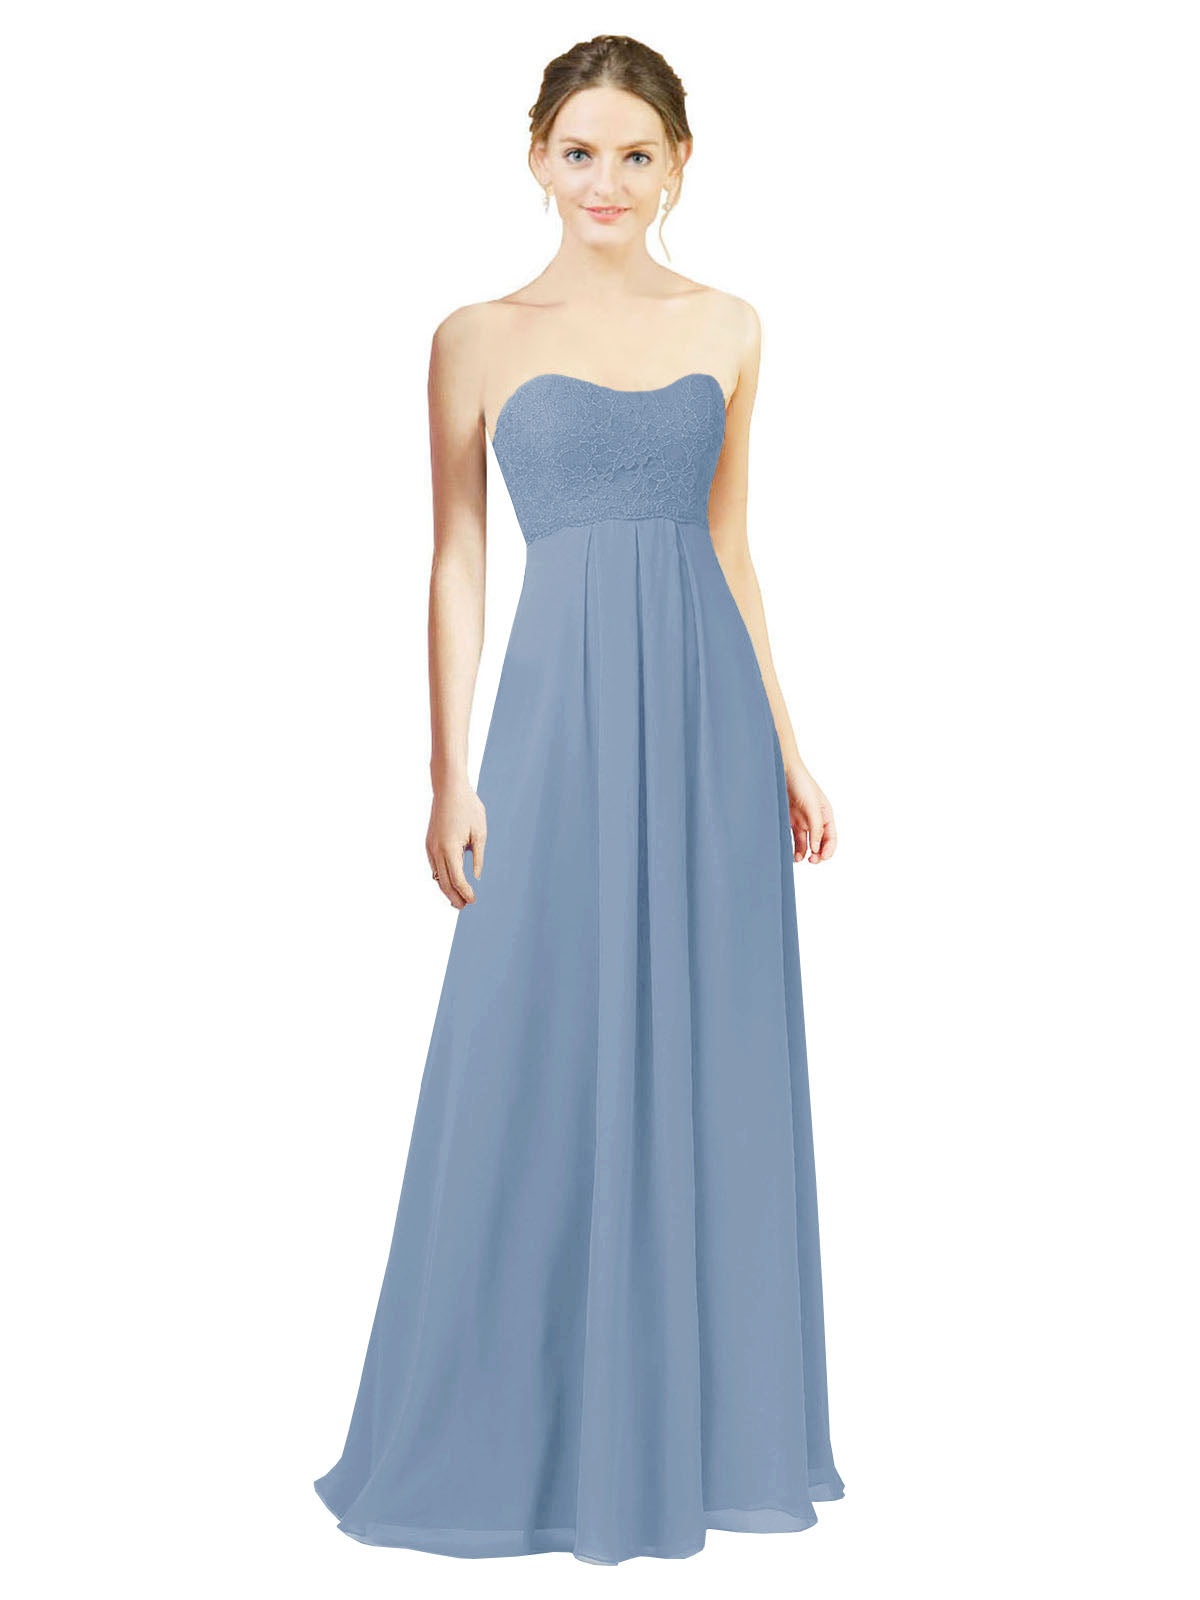 Dusty Blue A-Line Sweetheart Strapless Long Bridesmaid Dress Melany